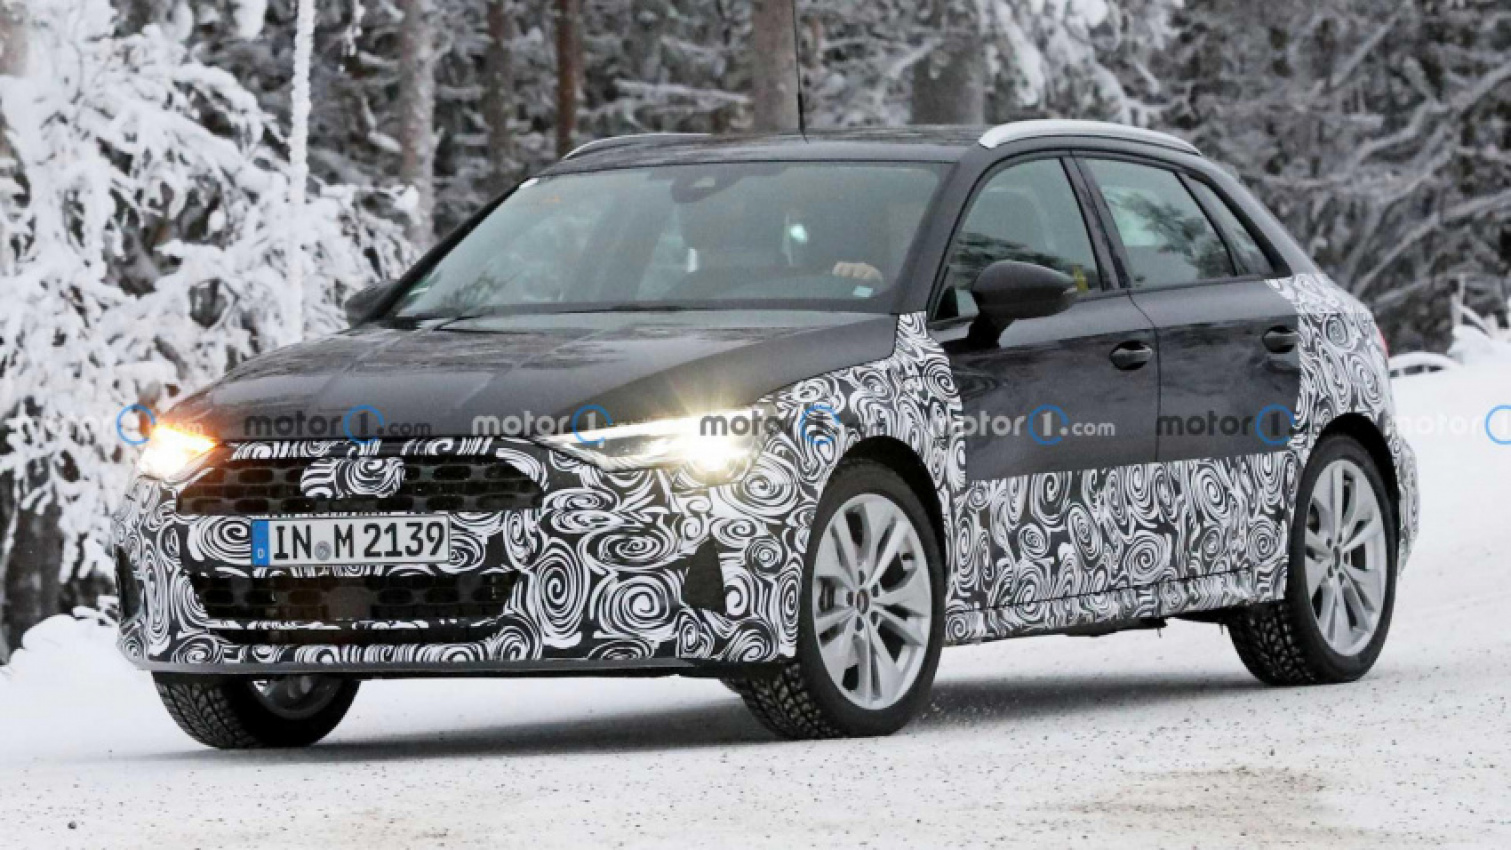 audi, autos, cars, audi a3, vnex, high-riding audi a3 spied in the snow looking like an allroad